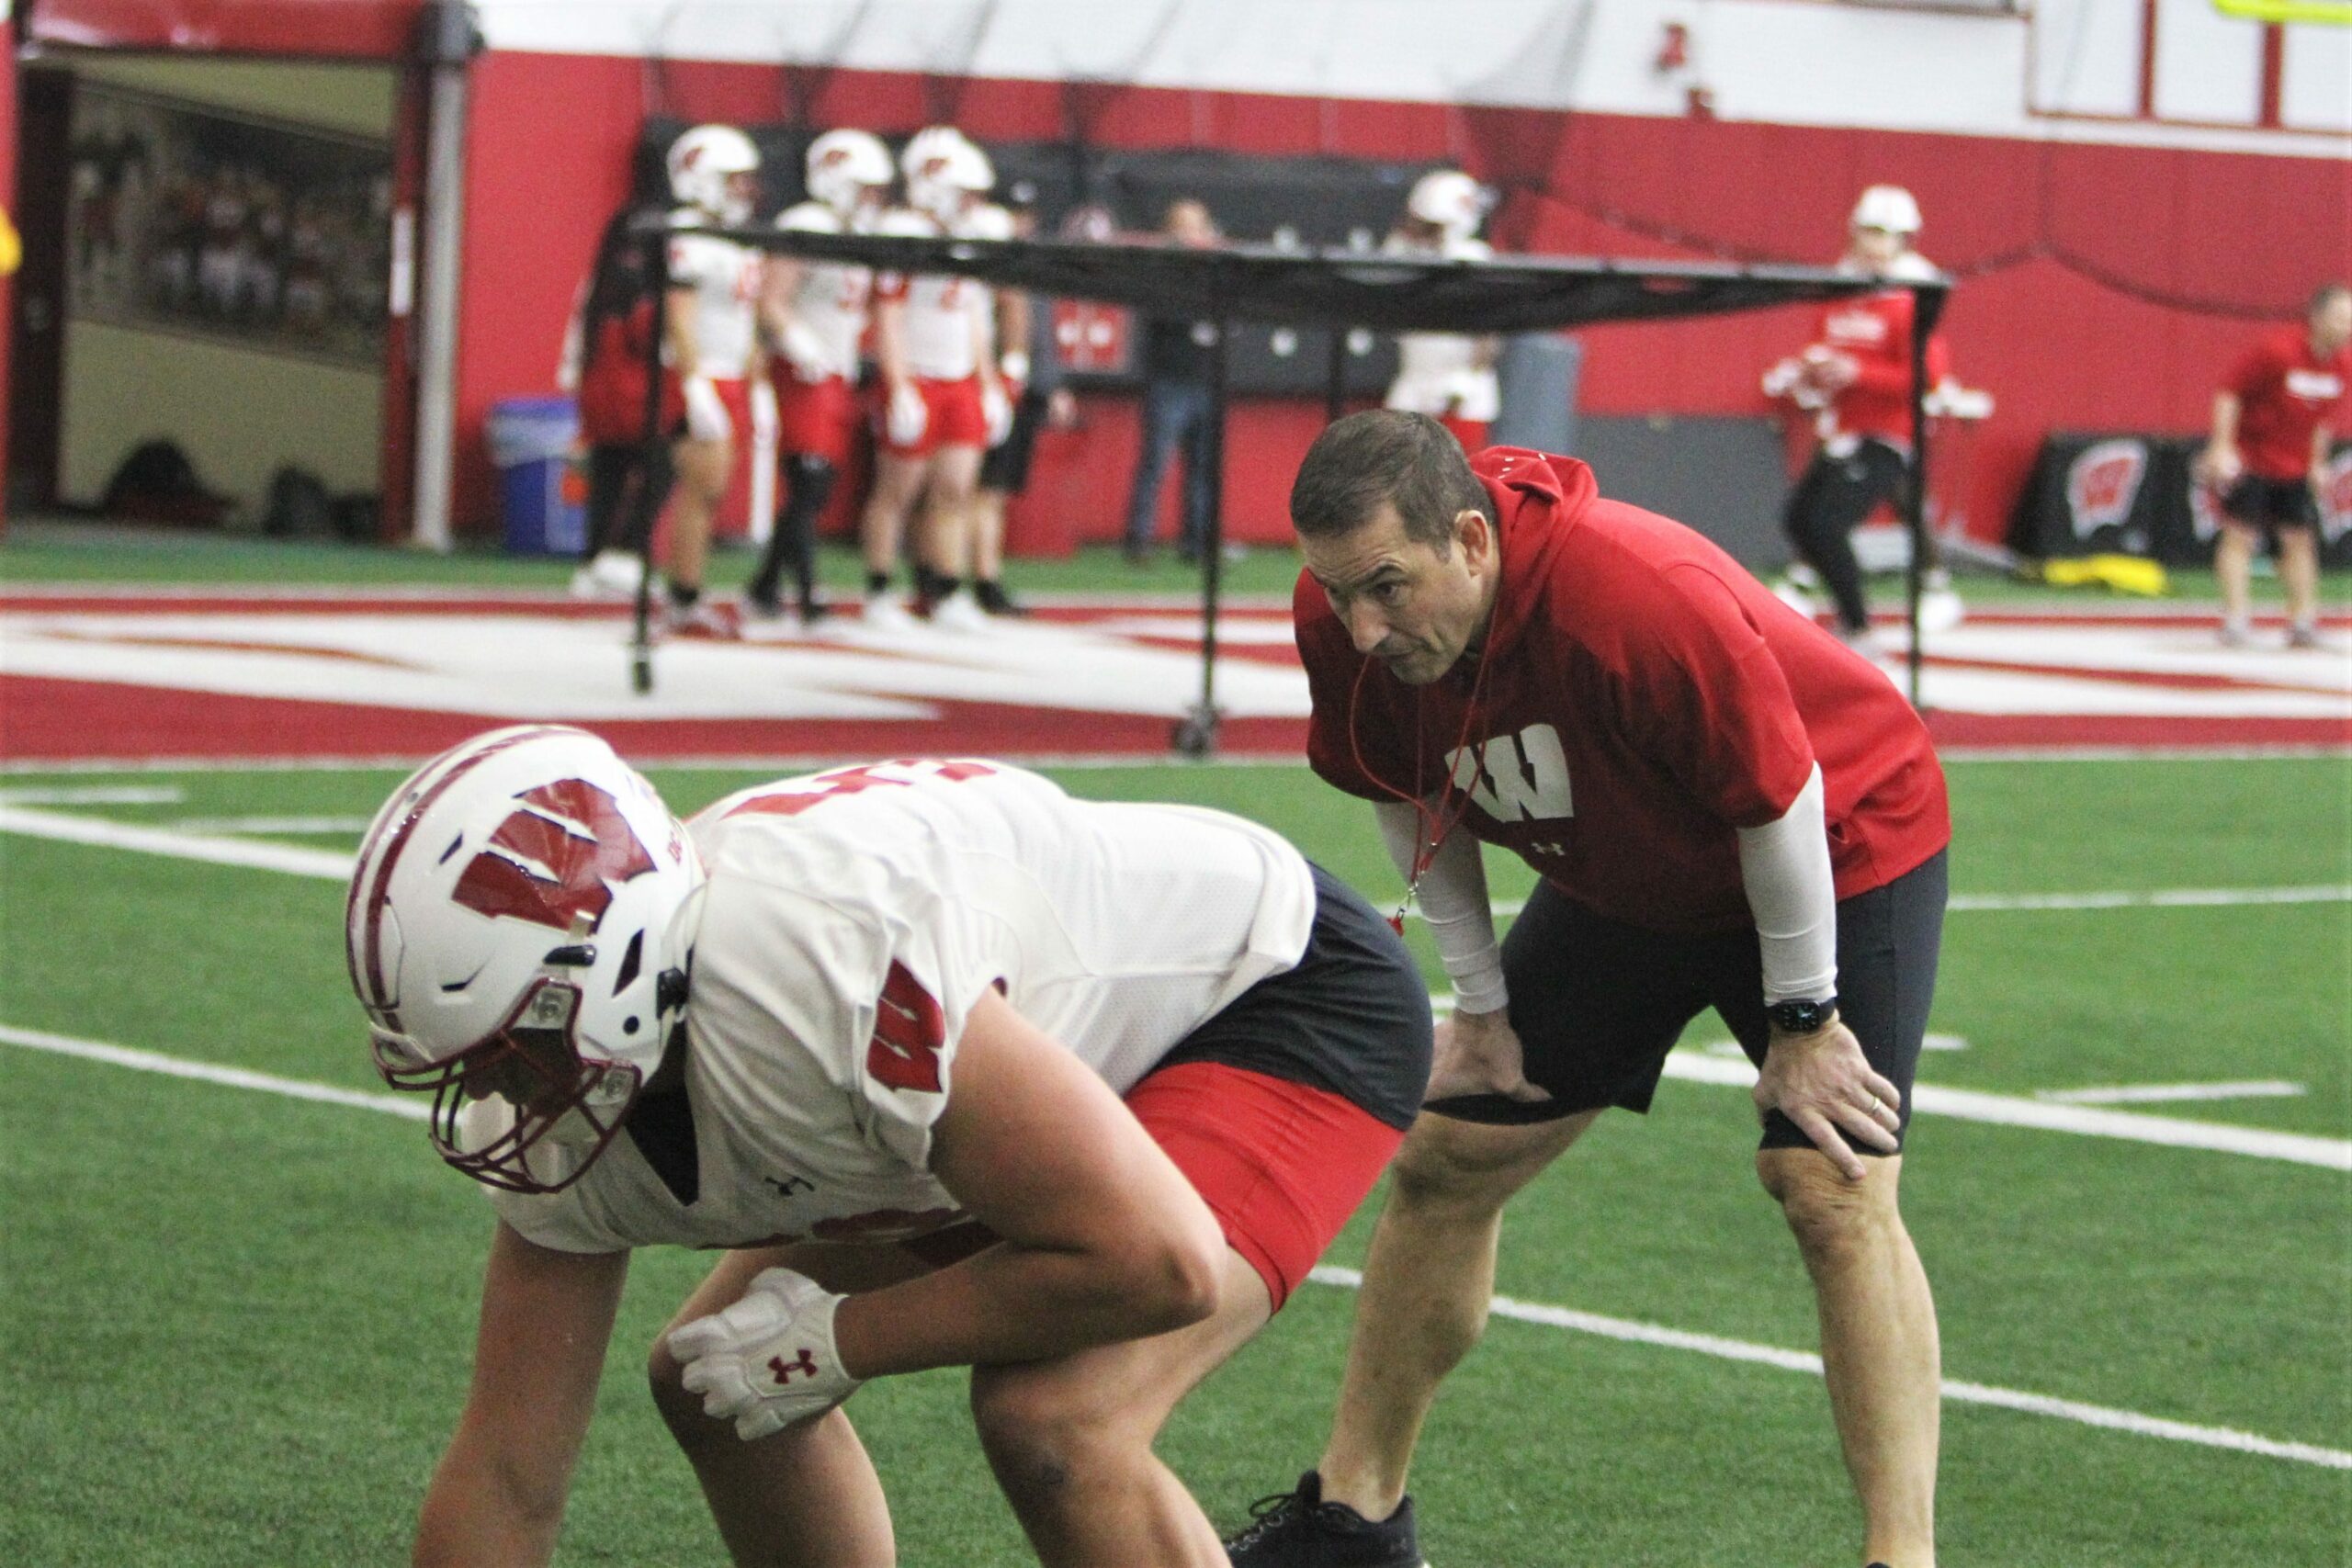 WATCH: Wisconsin HC Luke Fickell is mic’d up at Badgers’ spring practice